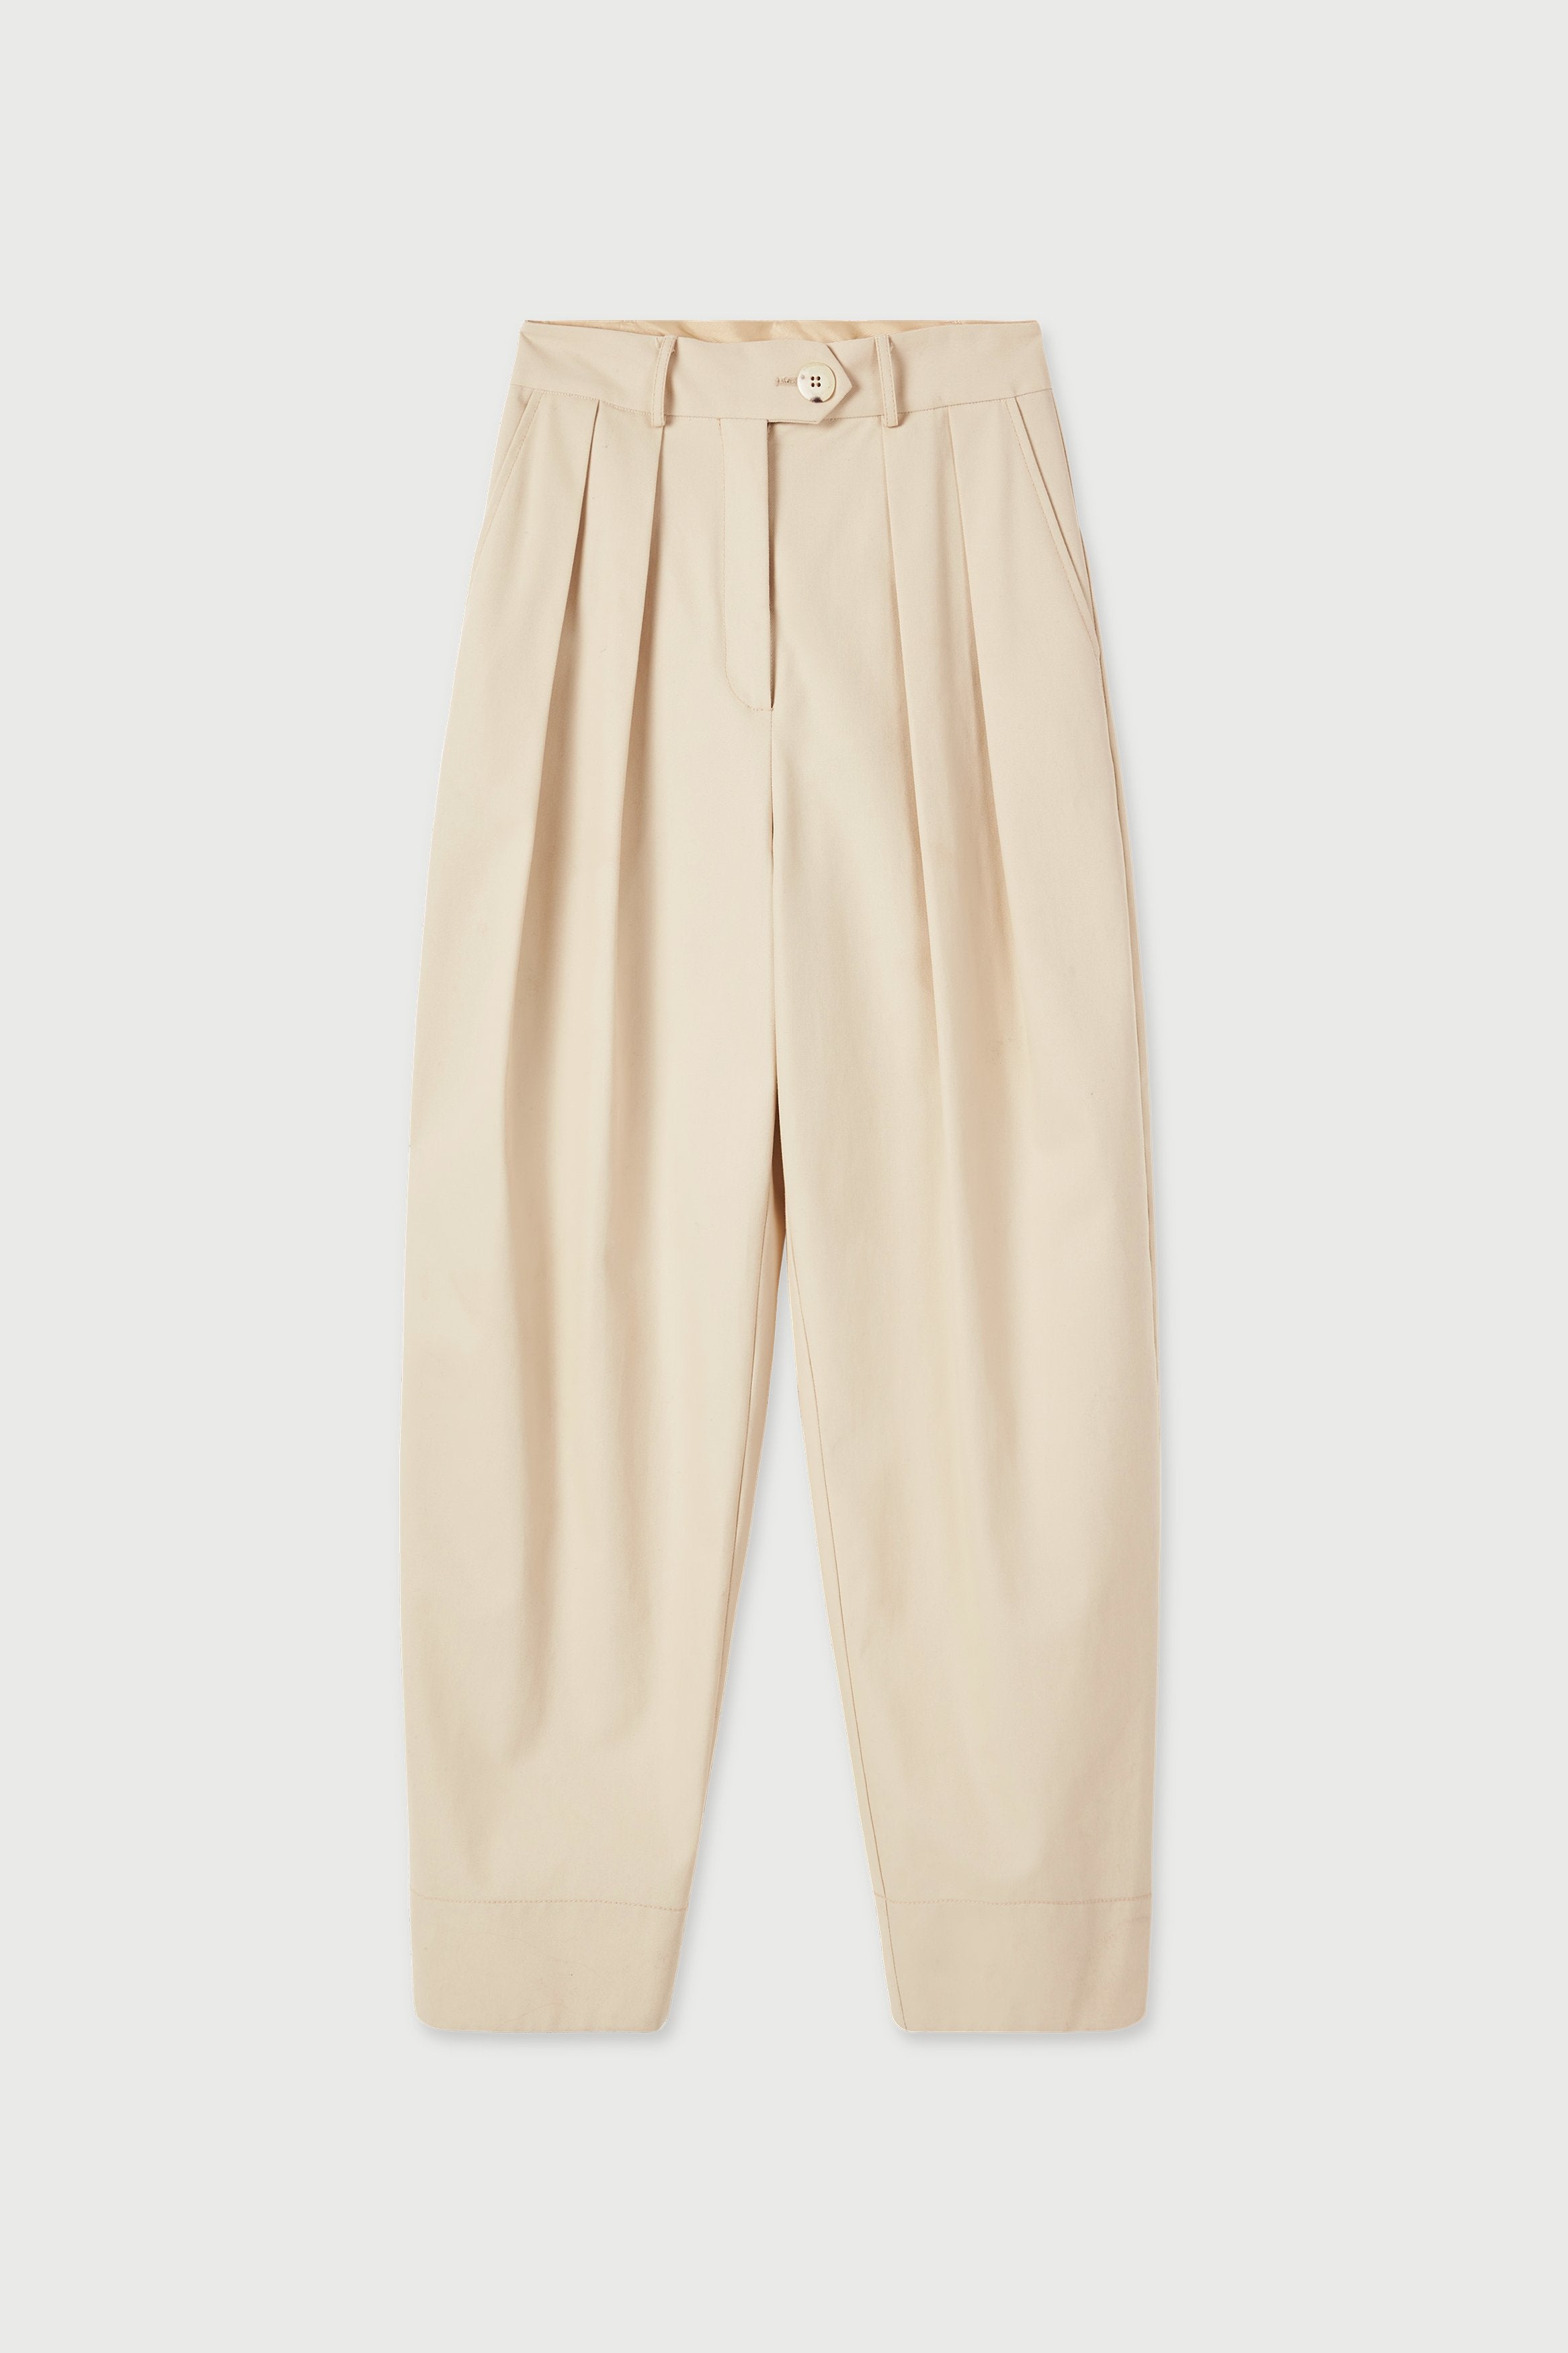 Spencer Pleat Front Cocoon Pant | Lee Mathews Official Online Store